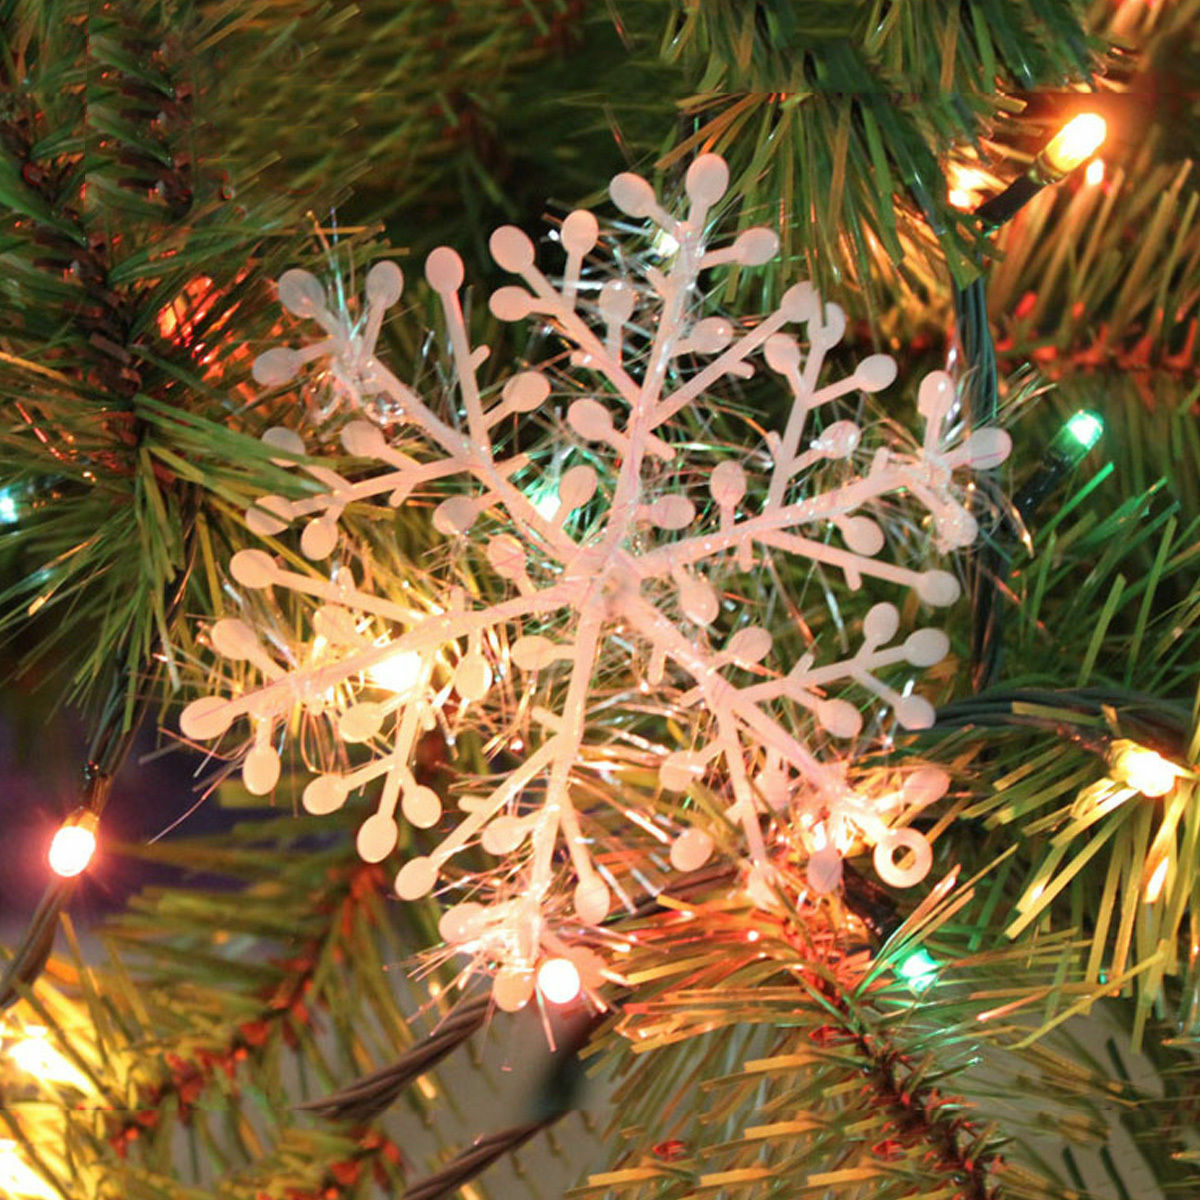 9pcs White Snowflakes Decorations Supplies Hanging Ornaments Gift Christm.l8